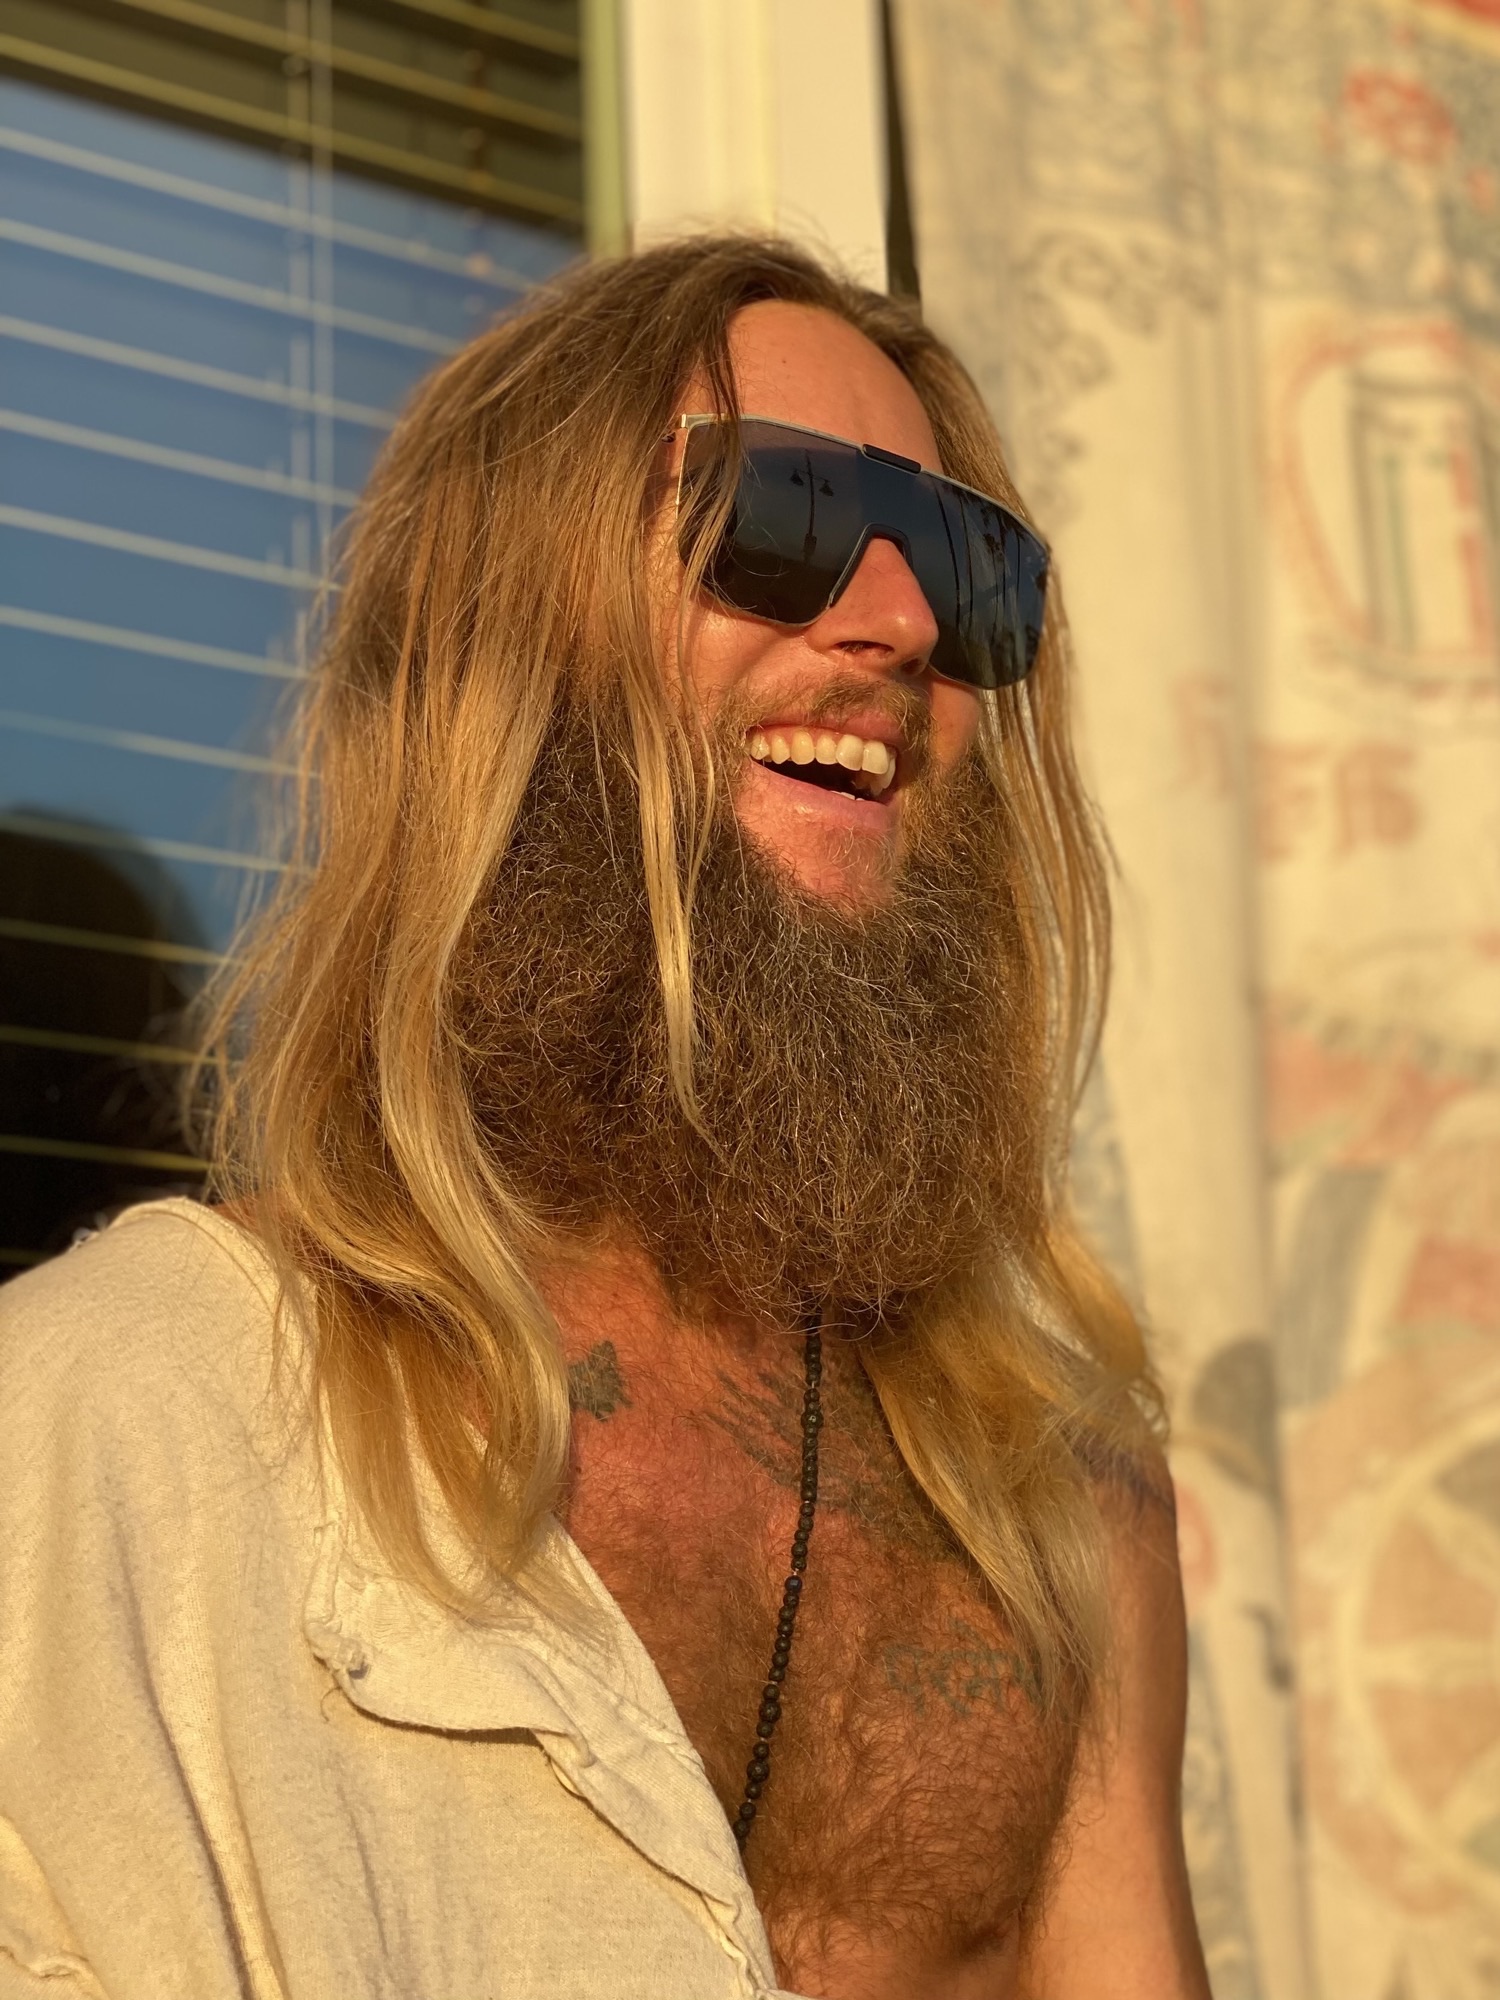 NFTV Founder Greg Cipes Talks to Us about Entertainment DAOs and His Past Voice Work 1